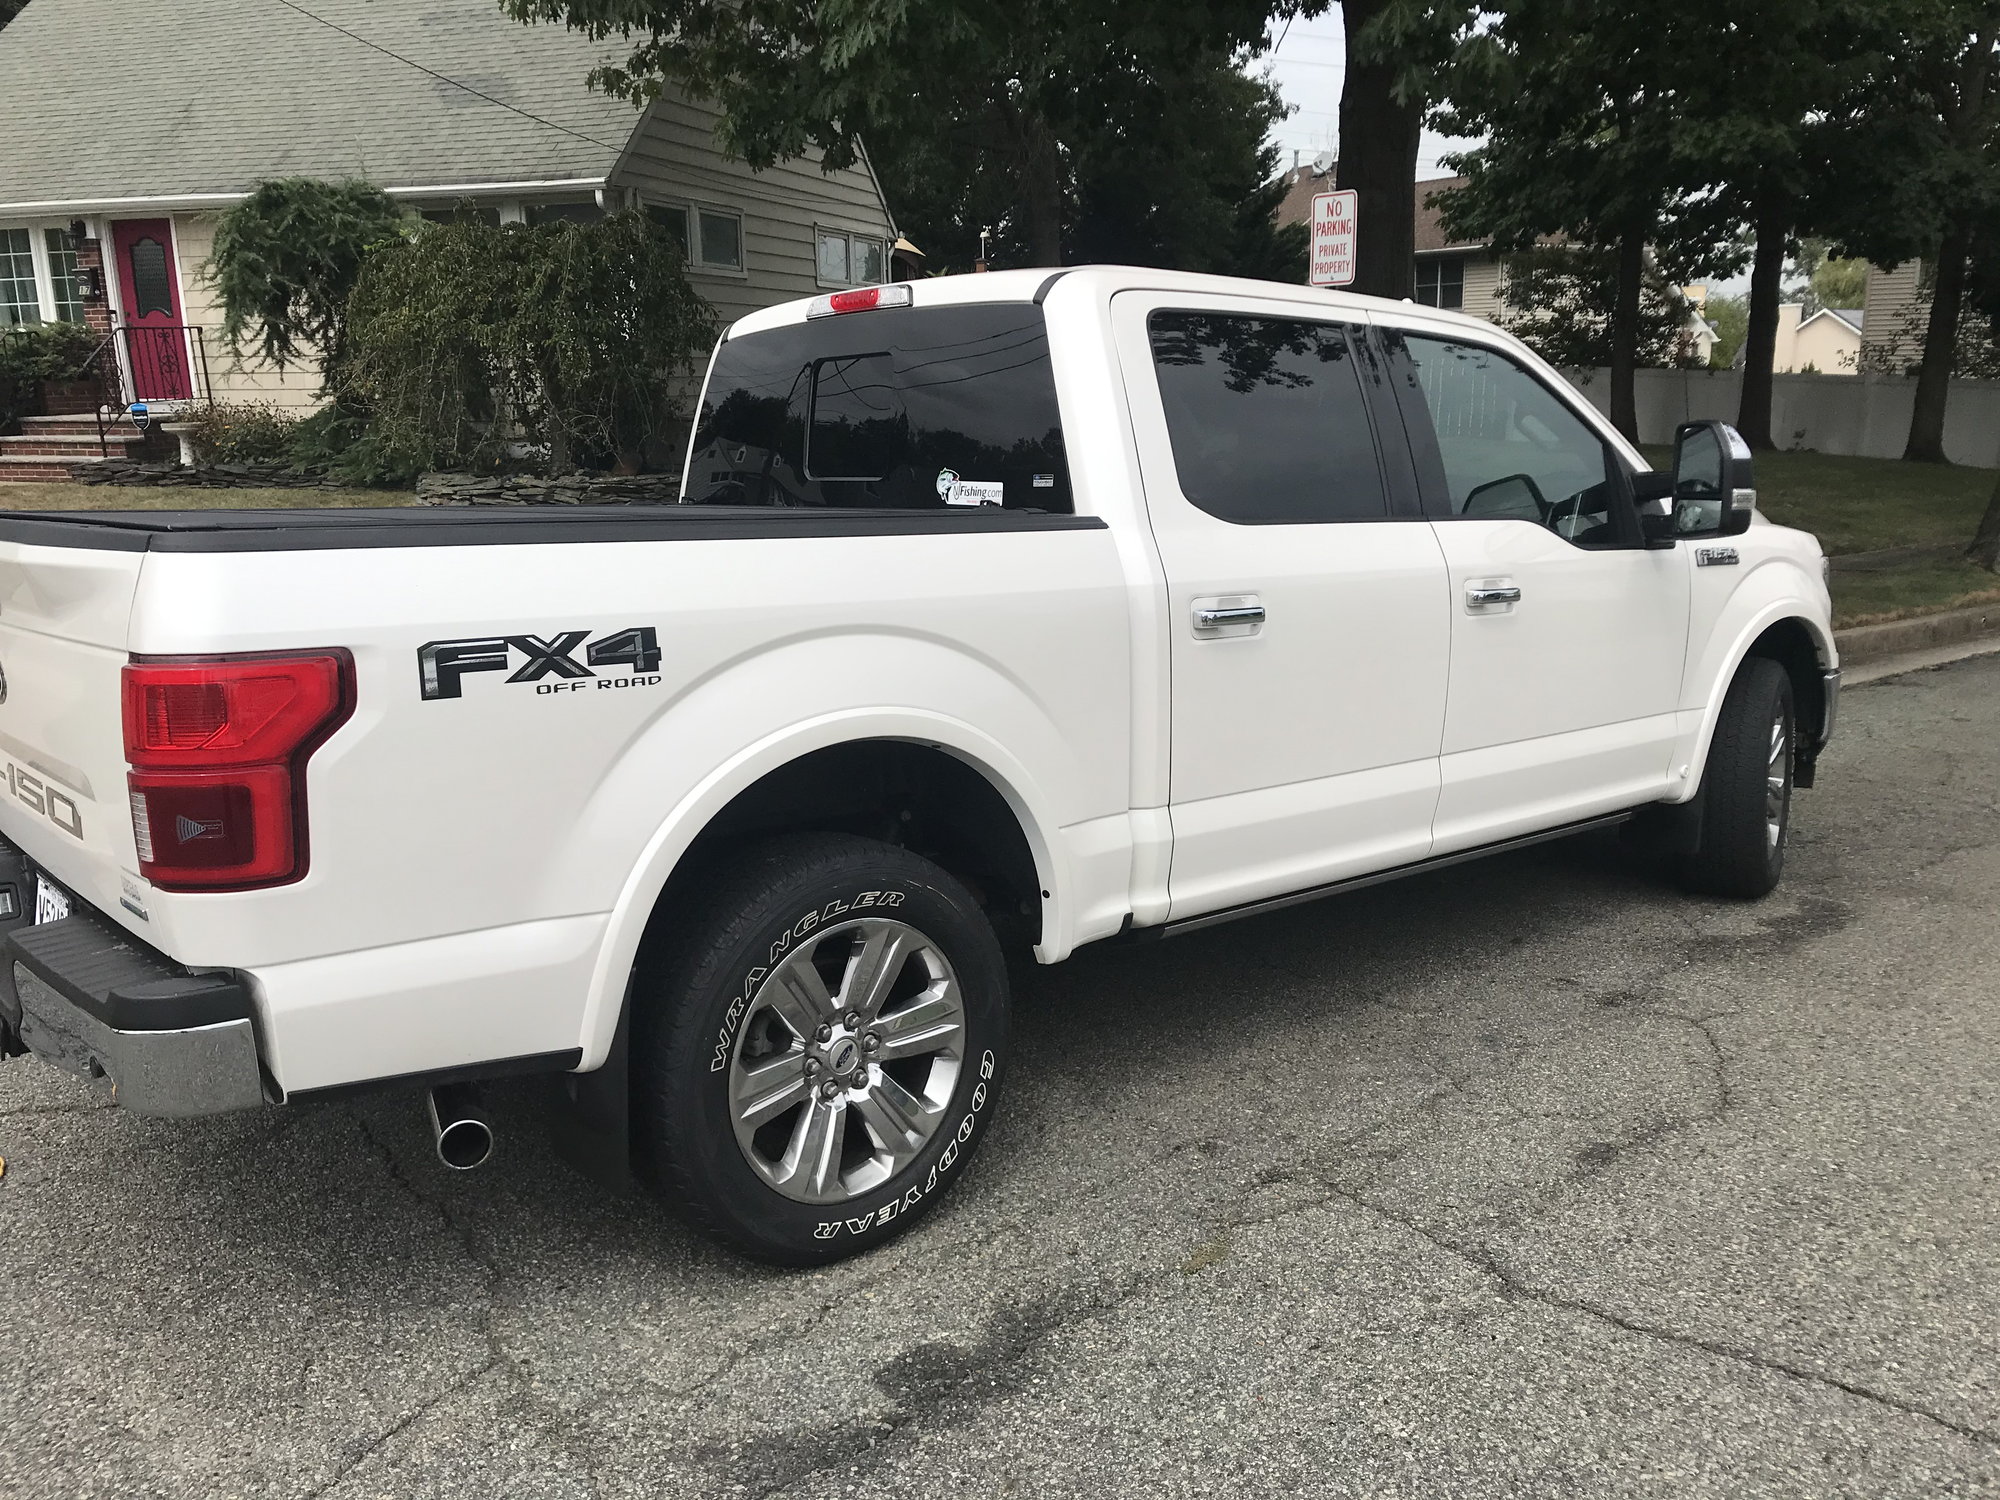 5 Fishing Mods for Your Ford Truck